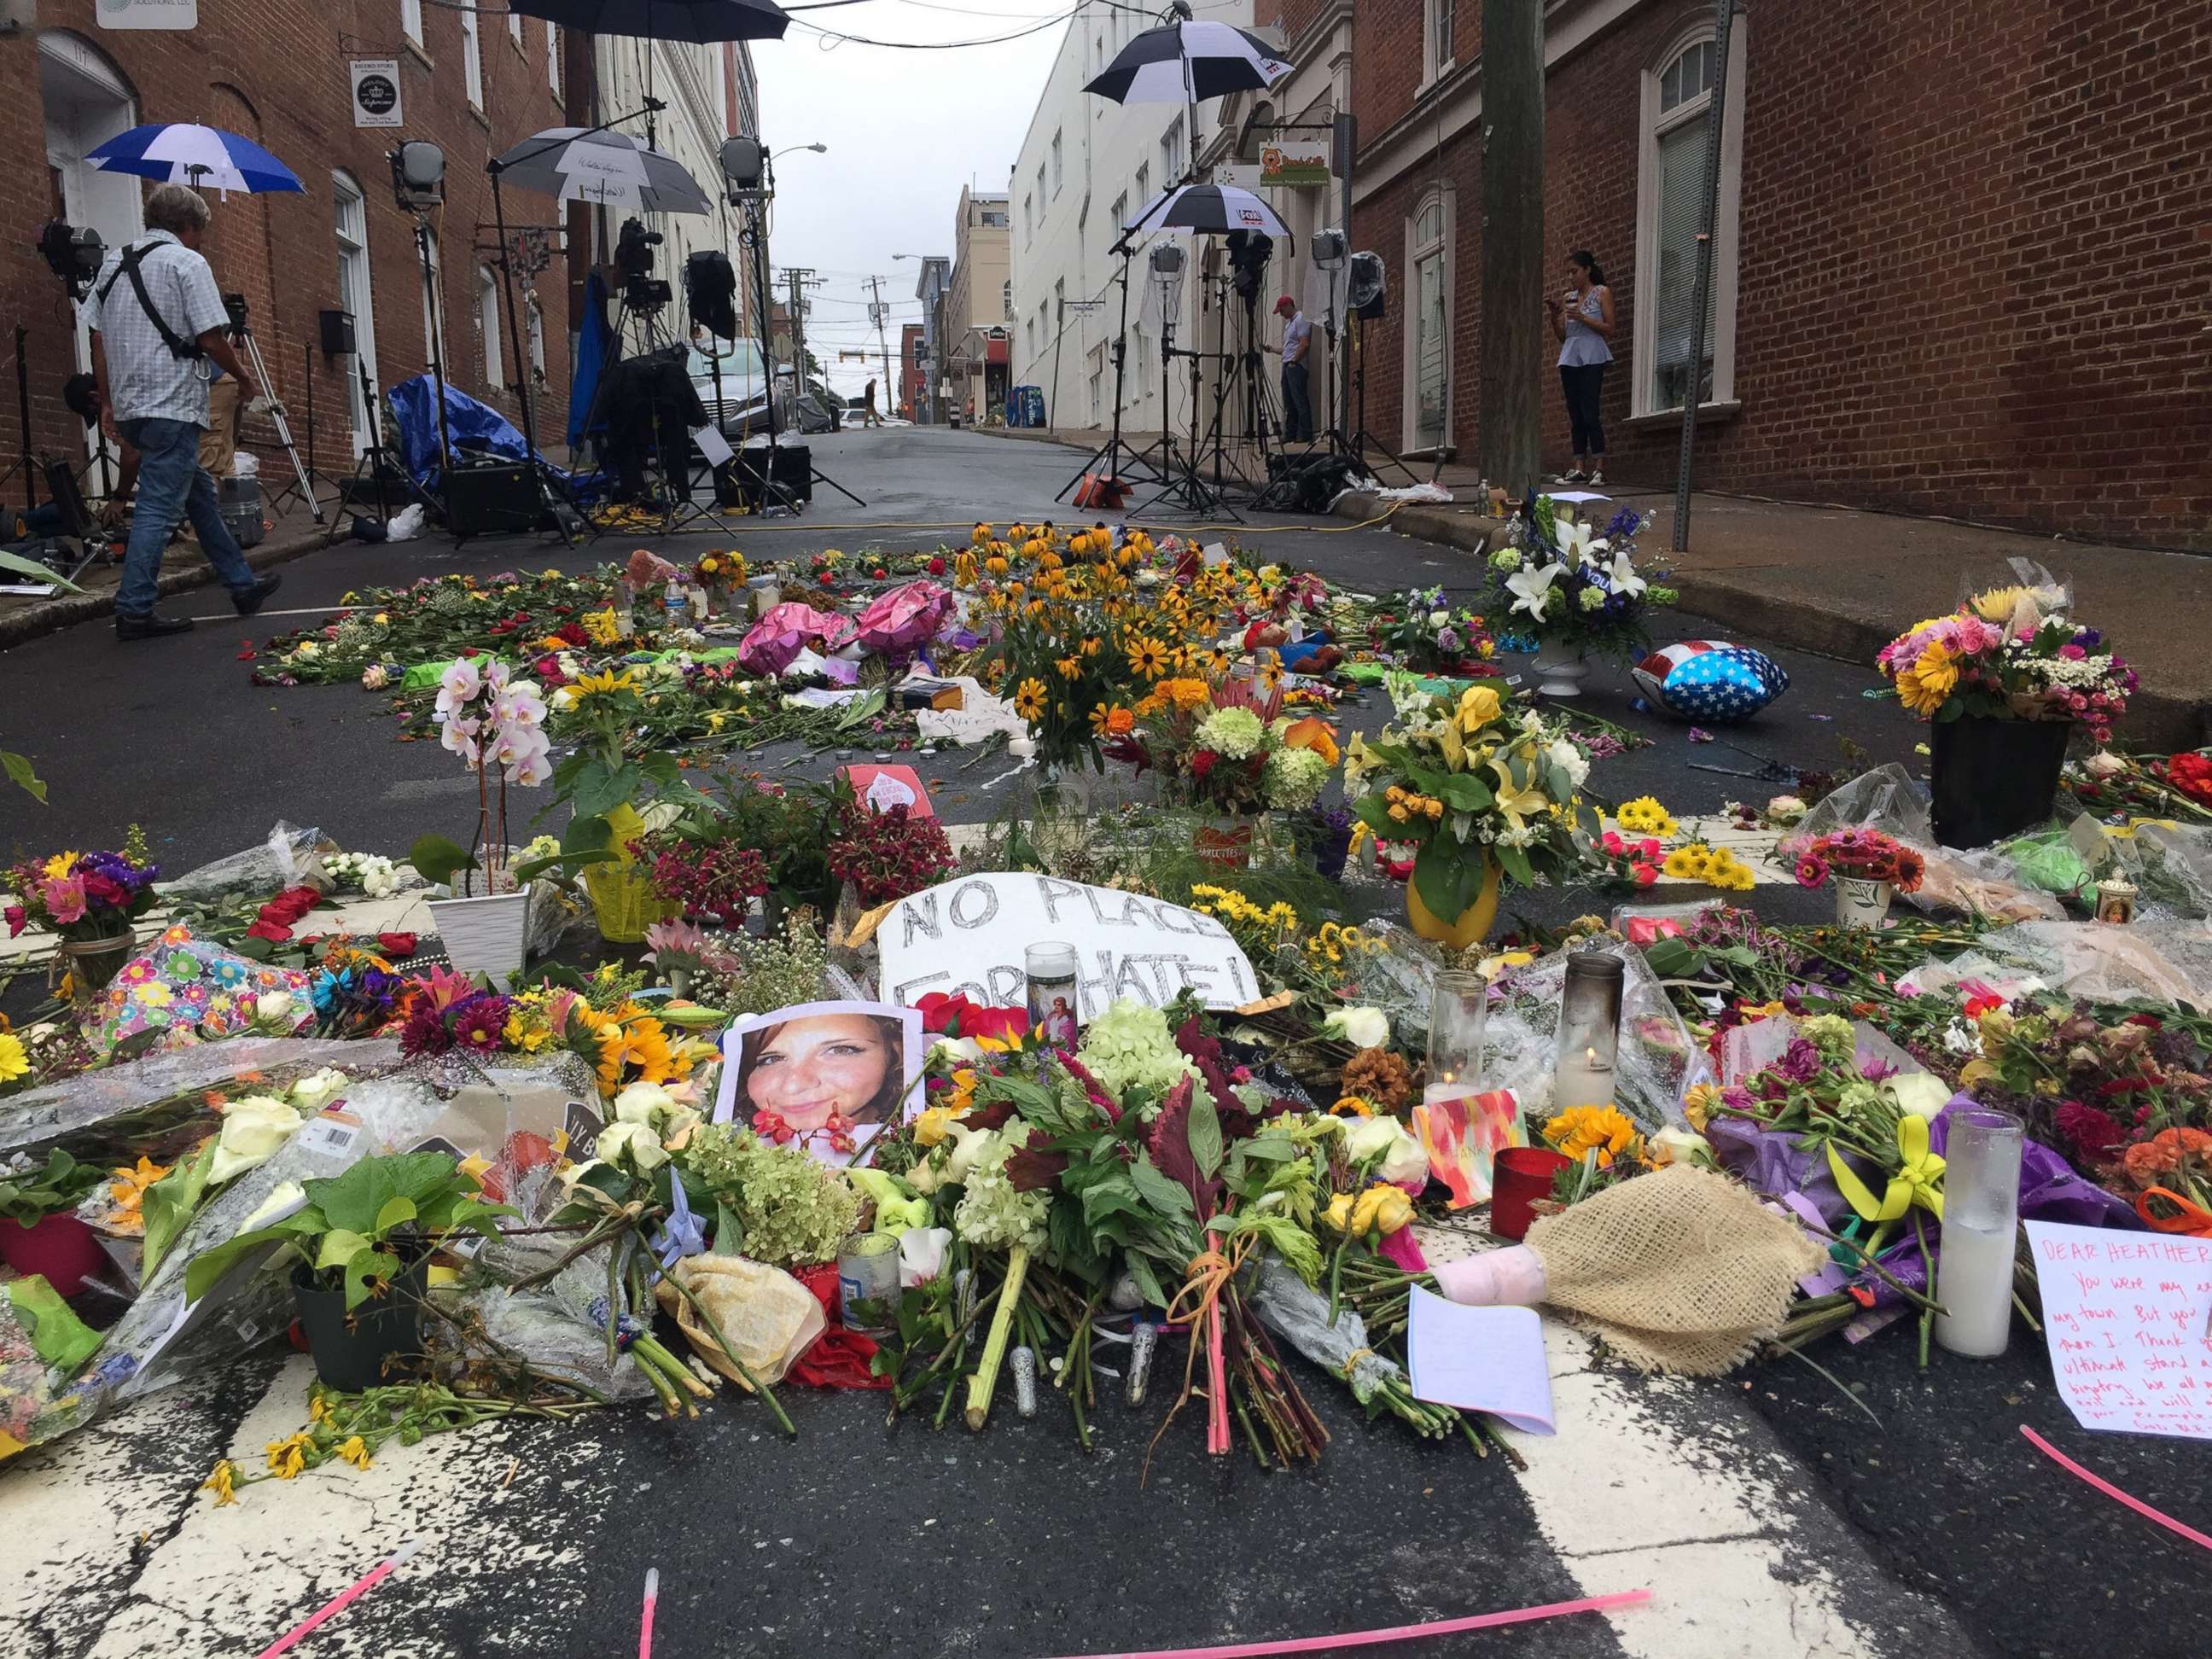 PHOTO: lowers are left in the street creating a make-shift memorial for Heather Heyer, who was killed during the 2017 protests in Charlottesville, Va.